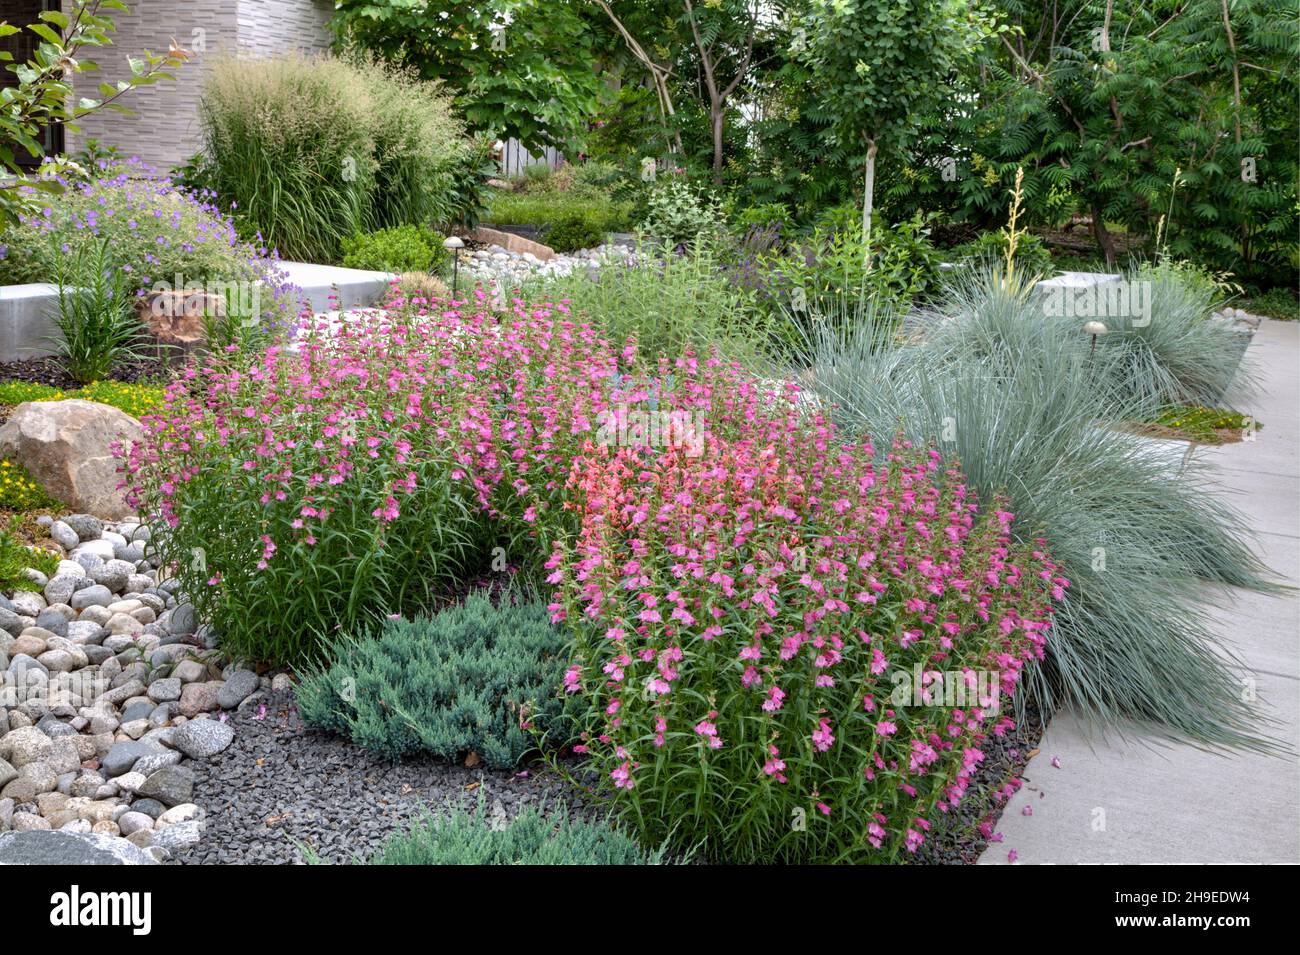 An informal garden based on the Xeriscape concept featuring Red Rocks Penstemon, Blue Oat Grass and other assorted grasses and perennials. Stock Photo